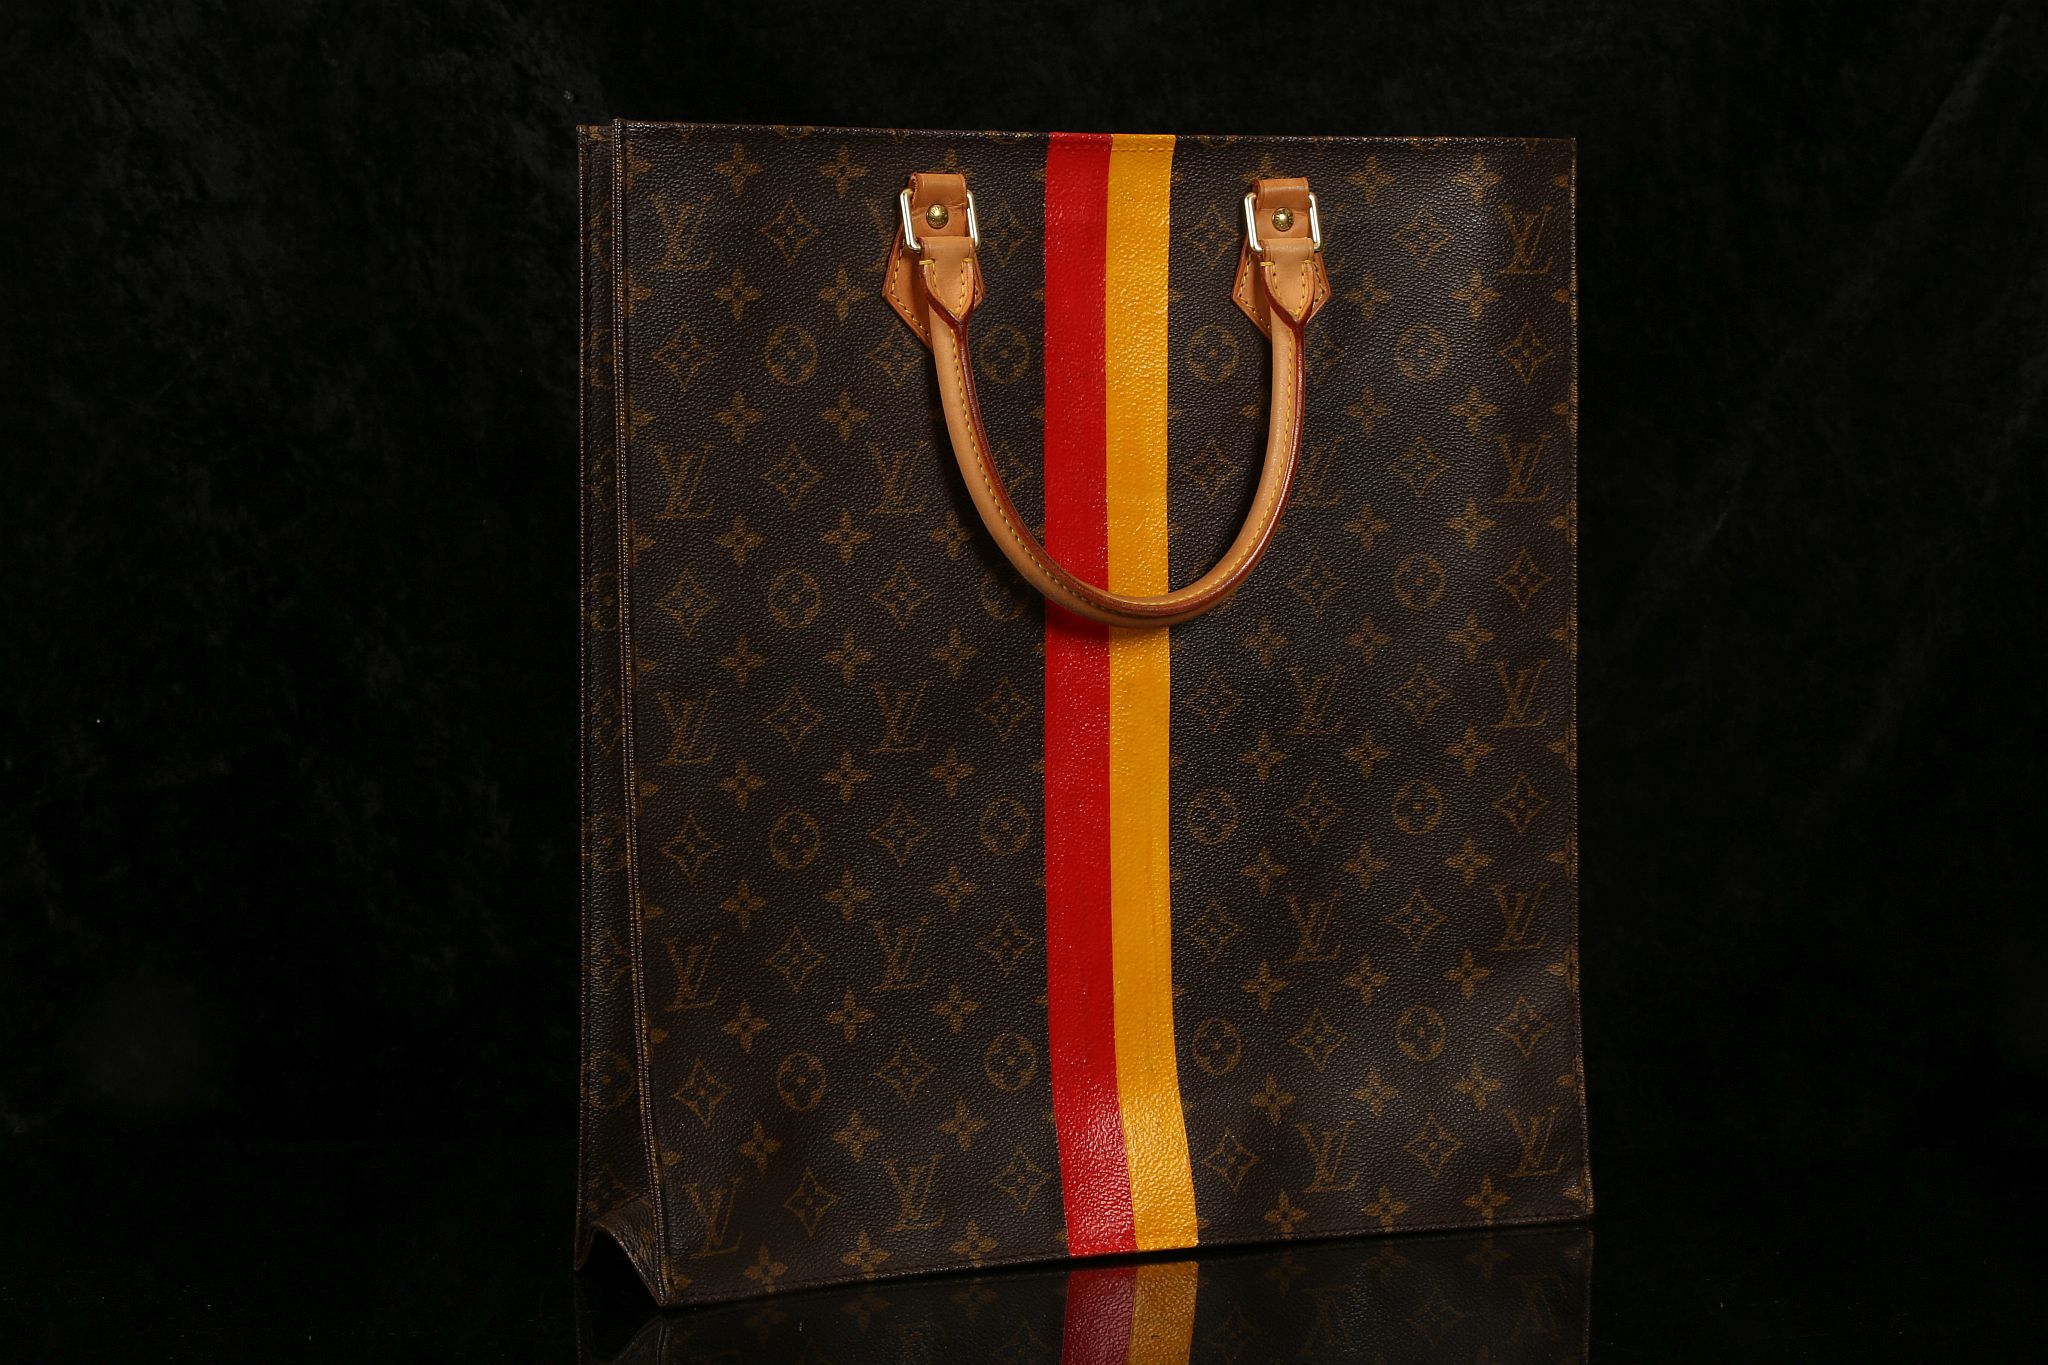 LOUIS VUITTON PLAT HANDBAG, date code for 2004, monogram canvas with leather trim and painted red